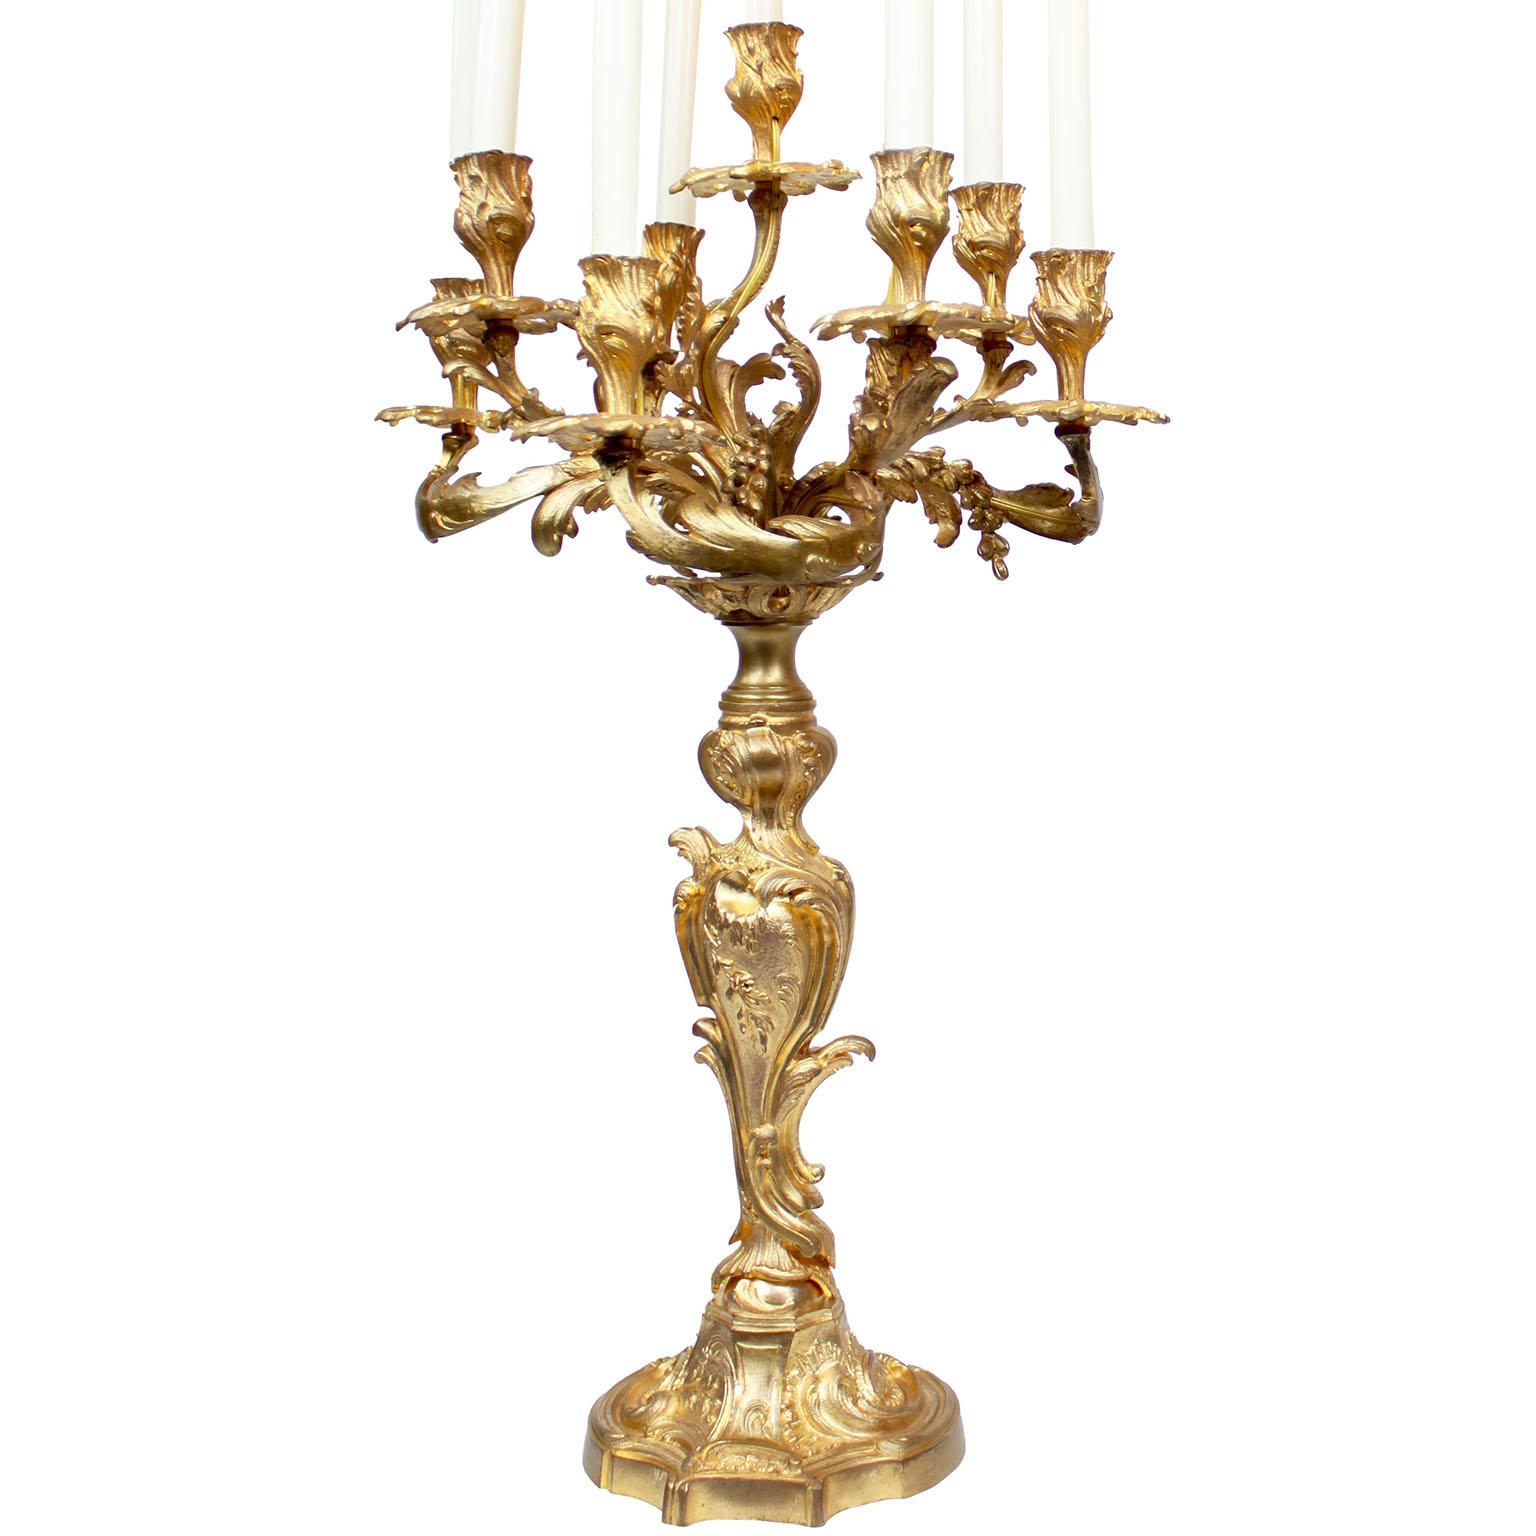 A Pair of French 19th Century Louis XV Style Gilt-Bronze Nine-Light Candelabra. The impressive pair of candelabrum, each on a floral stem base surmounted with nine scrolled candle-arms with acanthus, leaves and fruit decorations. (Electrified).